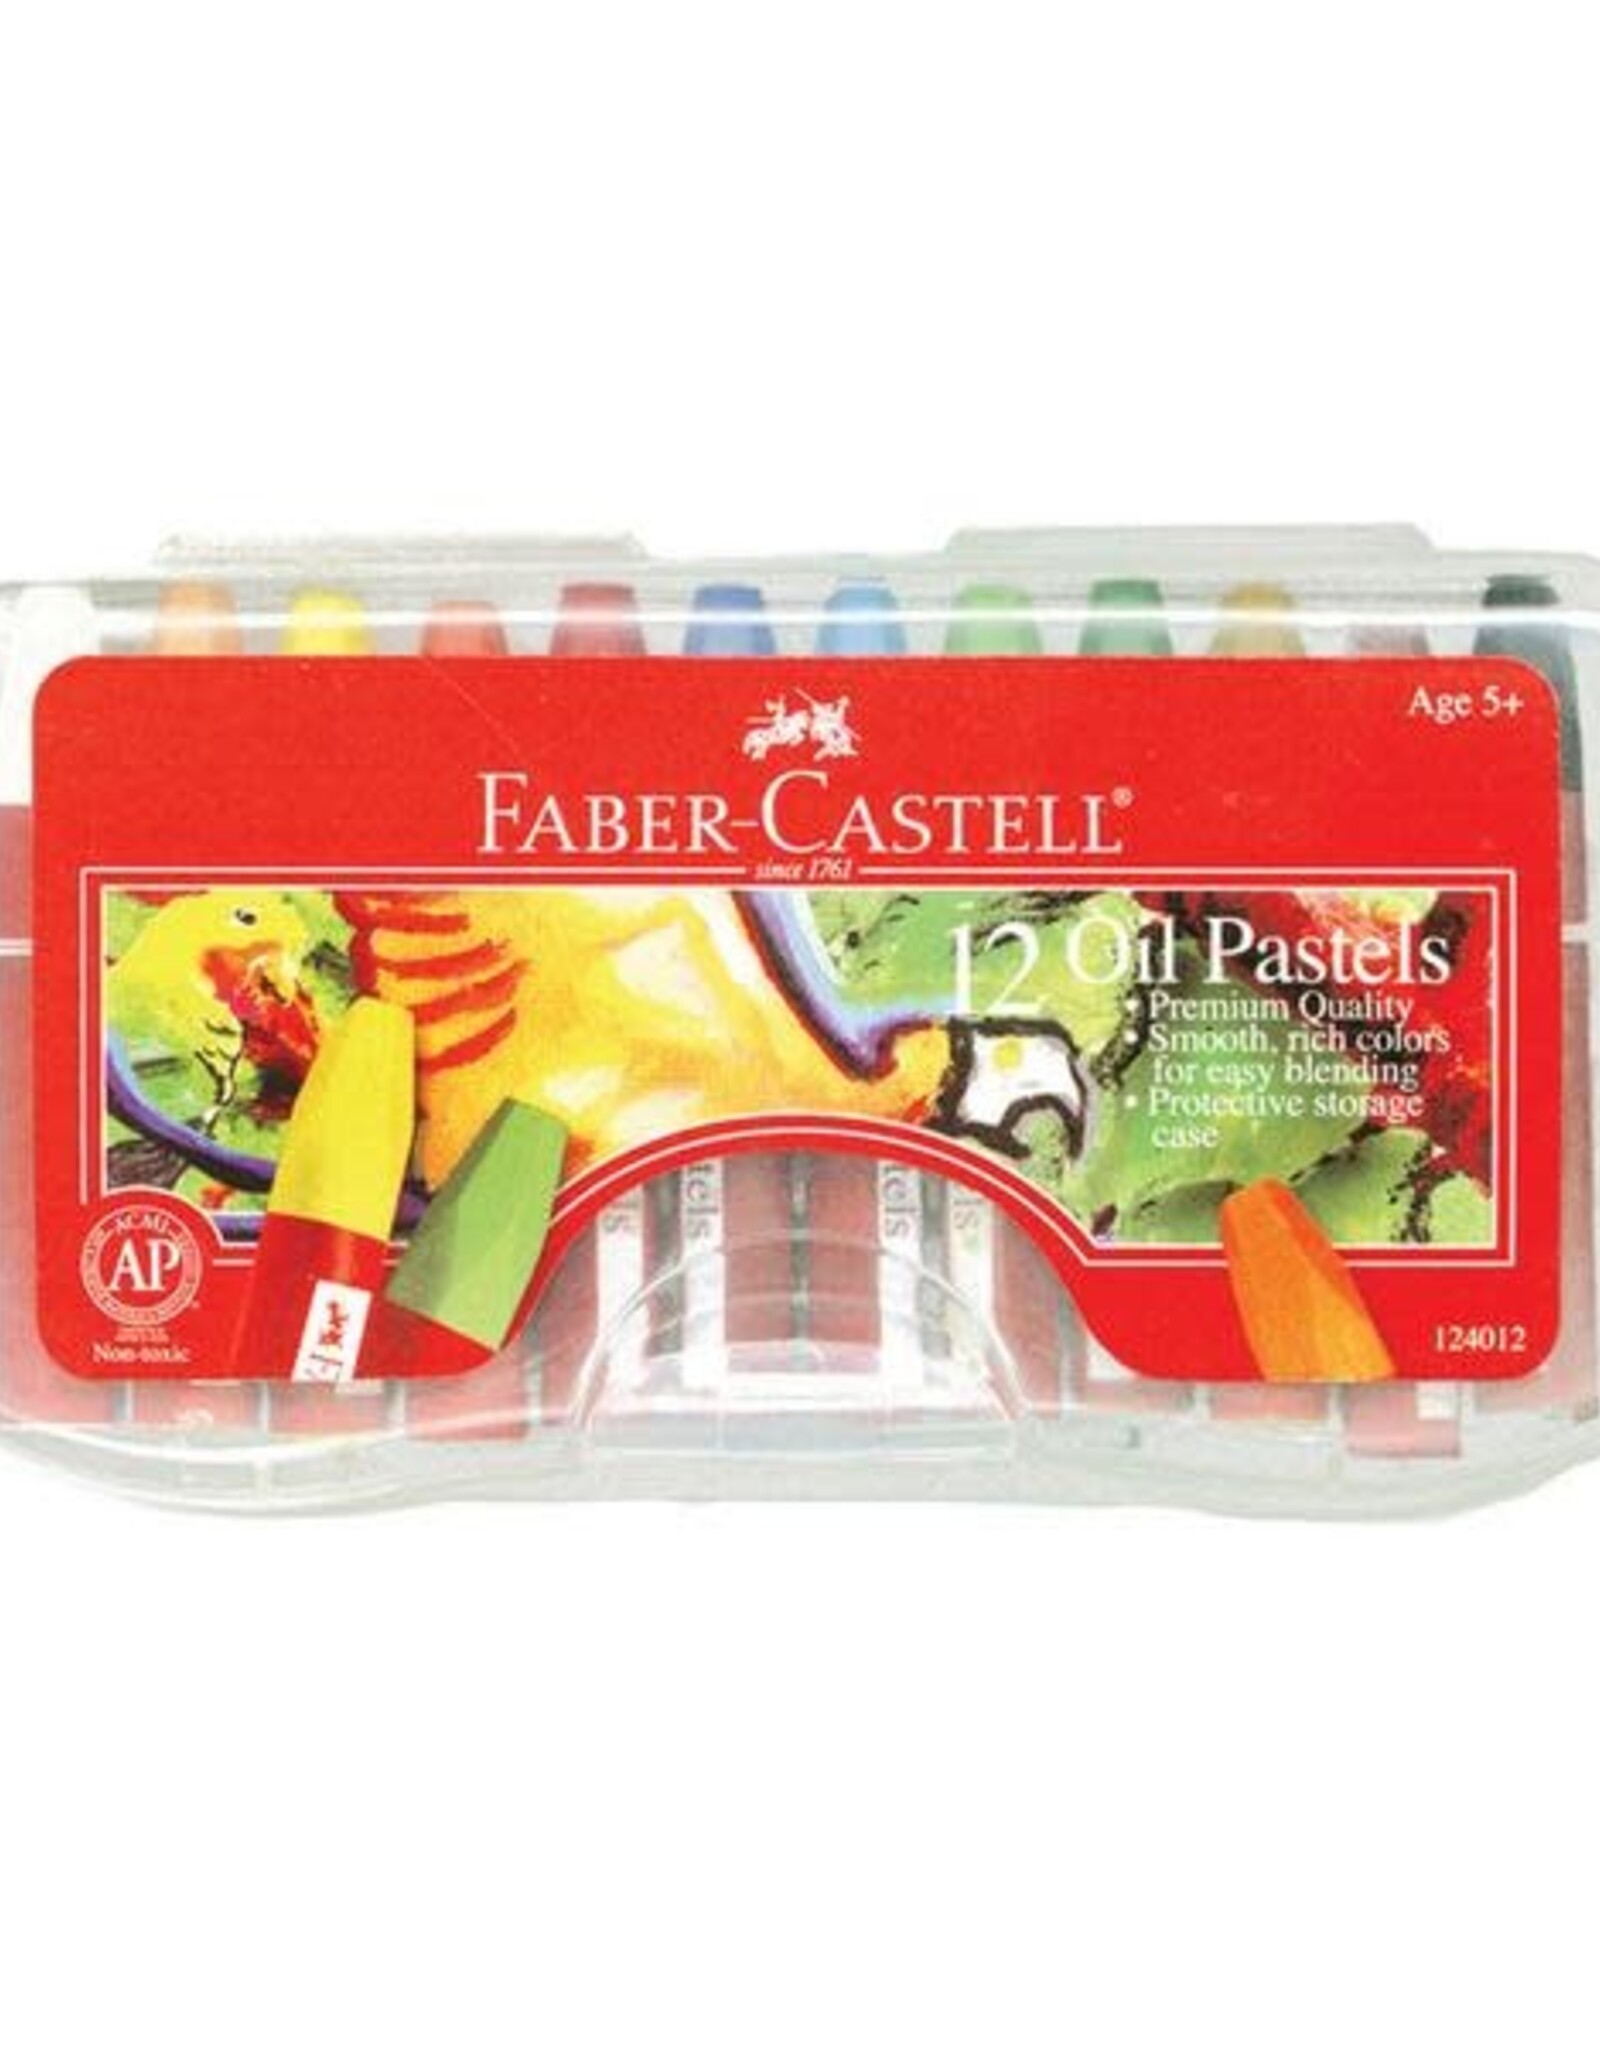 Faber Castell 12ct Oil Pastels